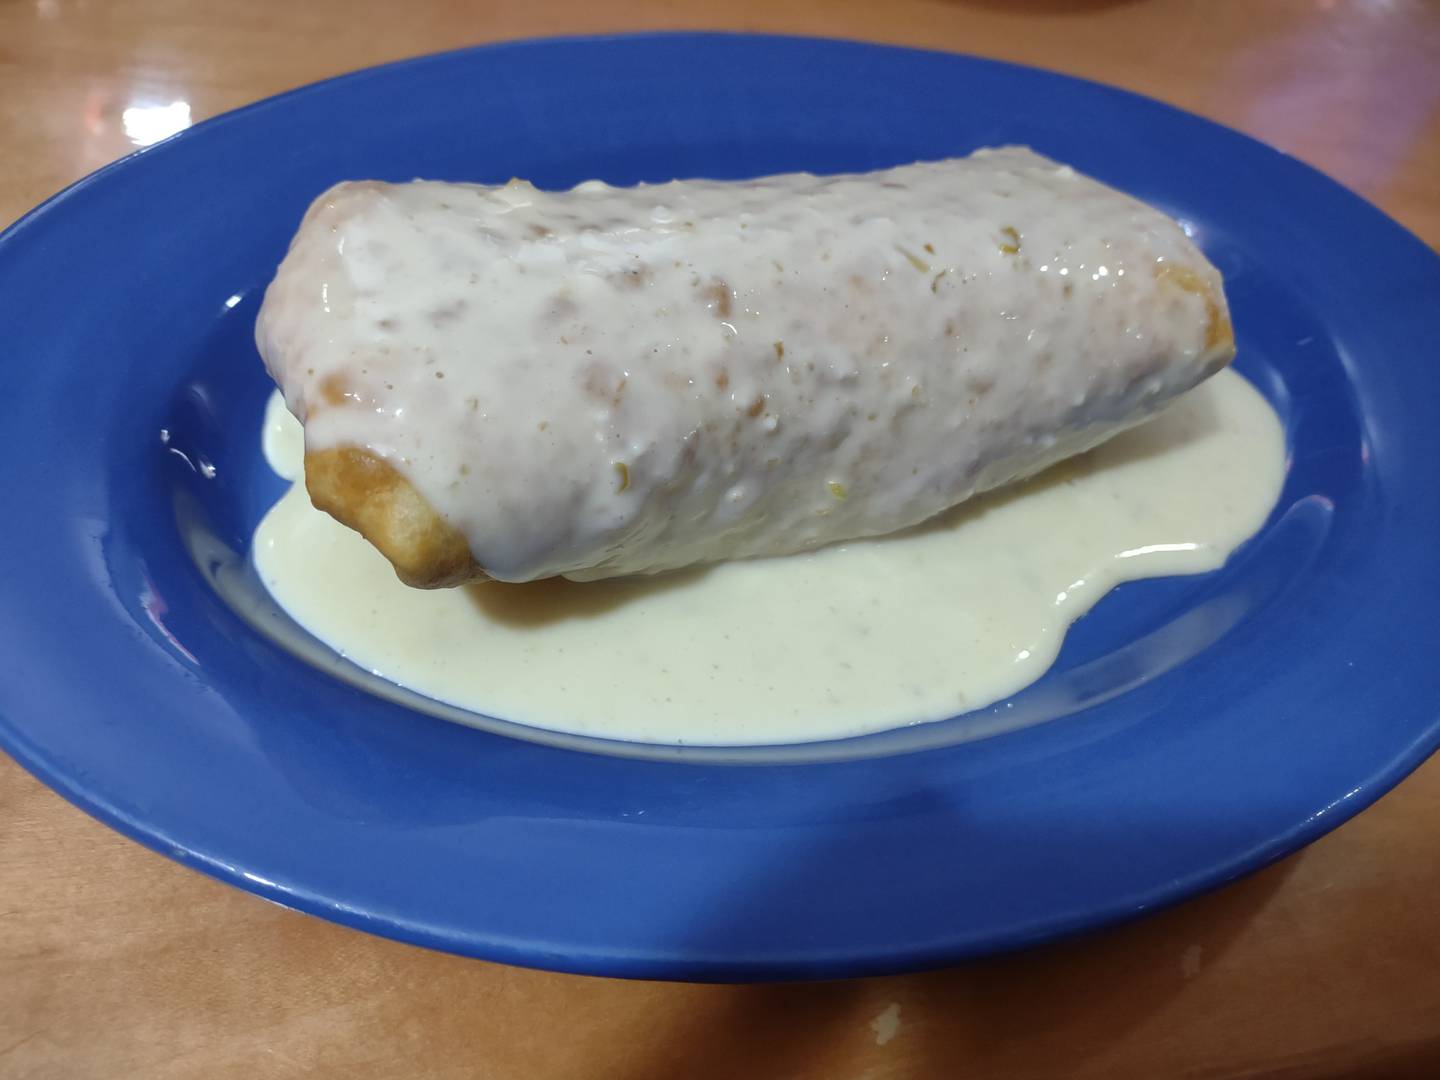 A ground beef chimichanga covered in cheese sauce from La Casa Jalisco in Streator.